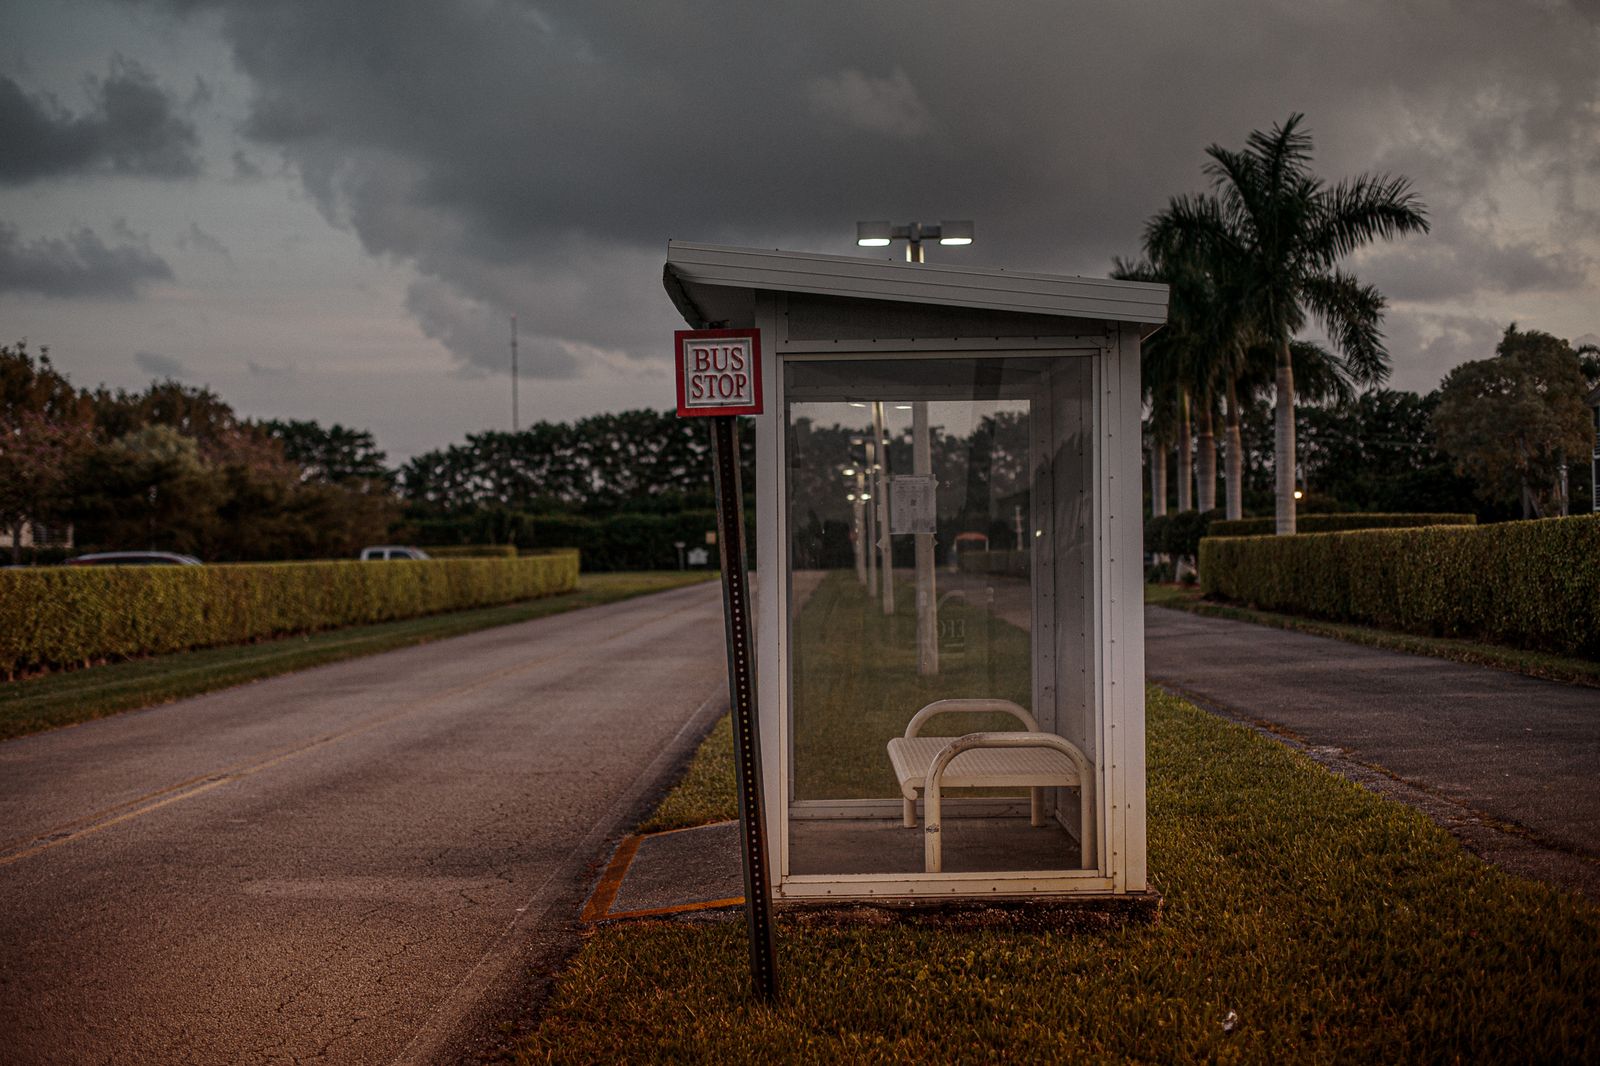 © Tajette O'halloran - Image from the Florida photography project